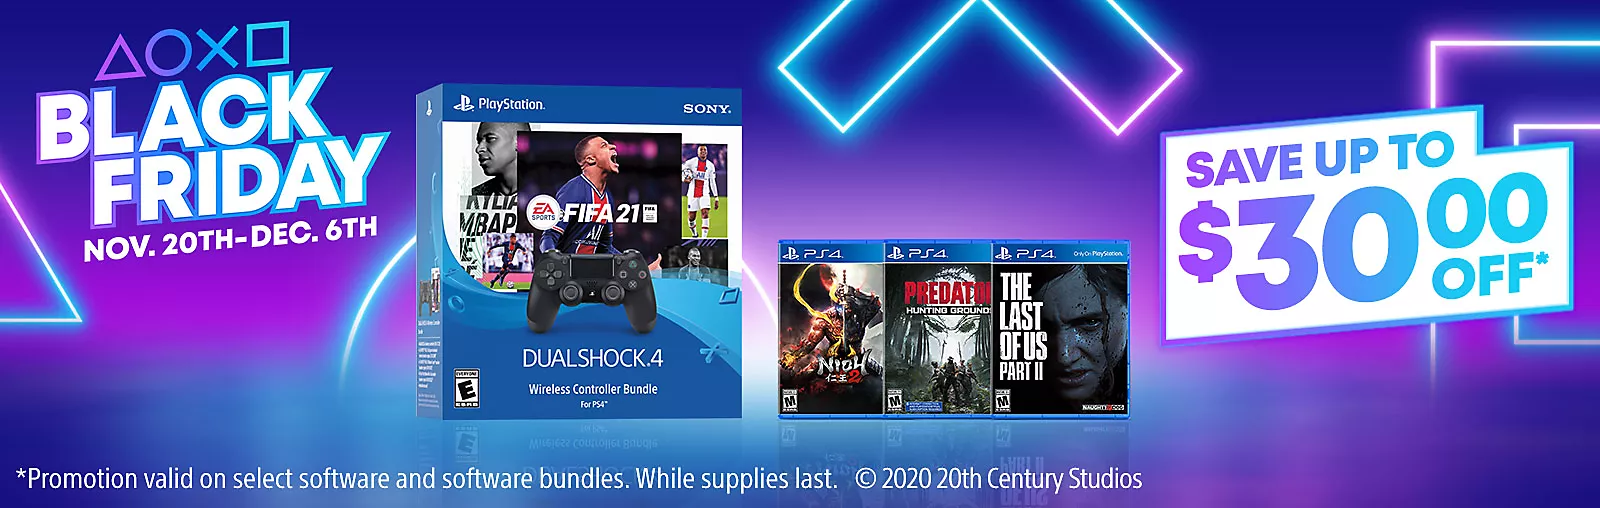 PlayStation Store Black Friday Deals Has The Last of Us 2, Ghost